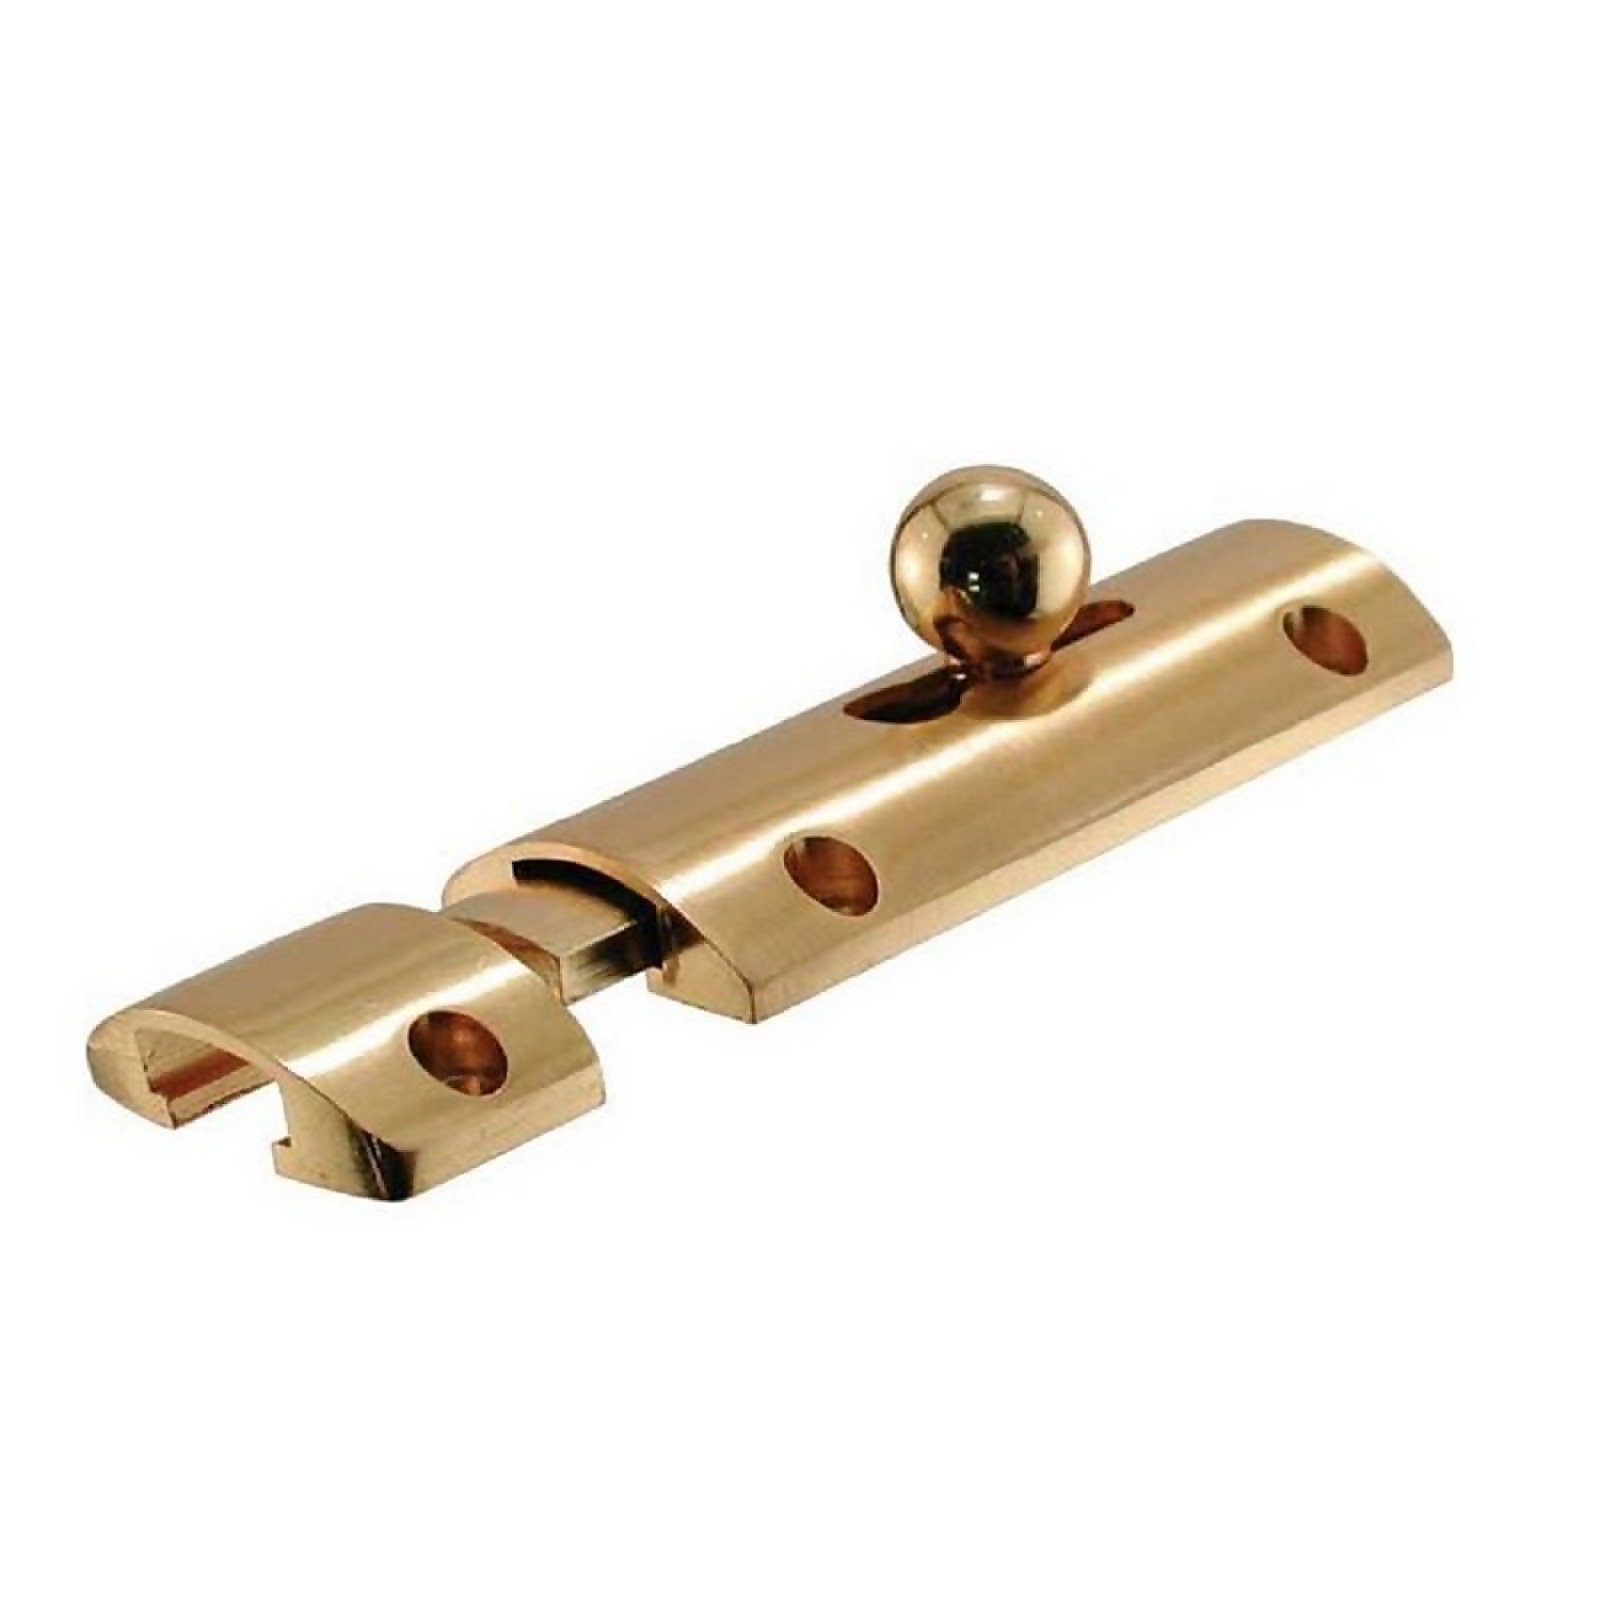 Photo of Convex Bolt - Polished Brushed Brass - 76mm